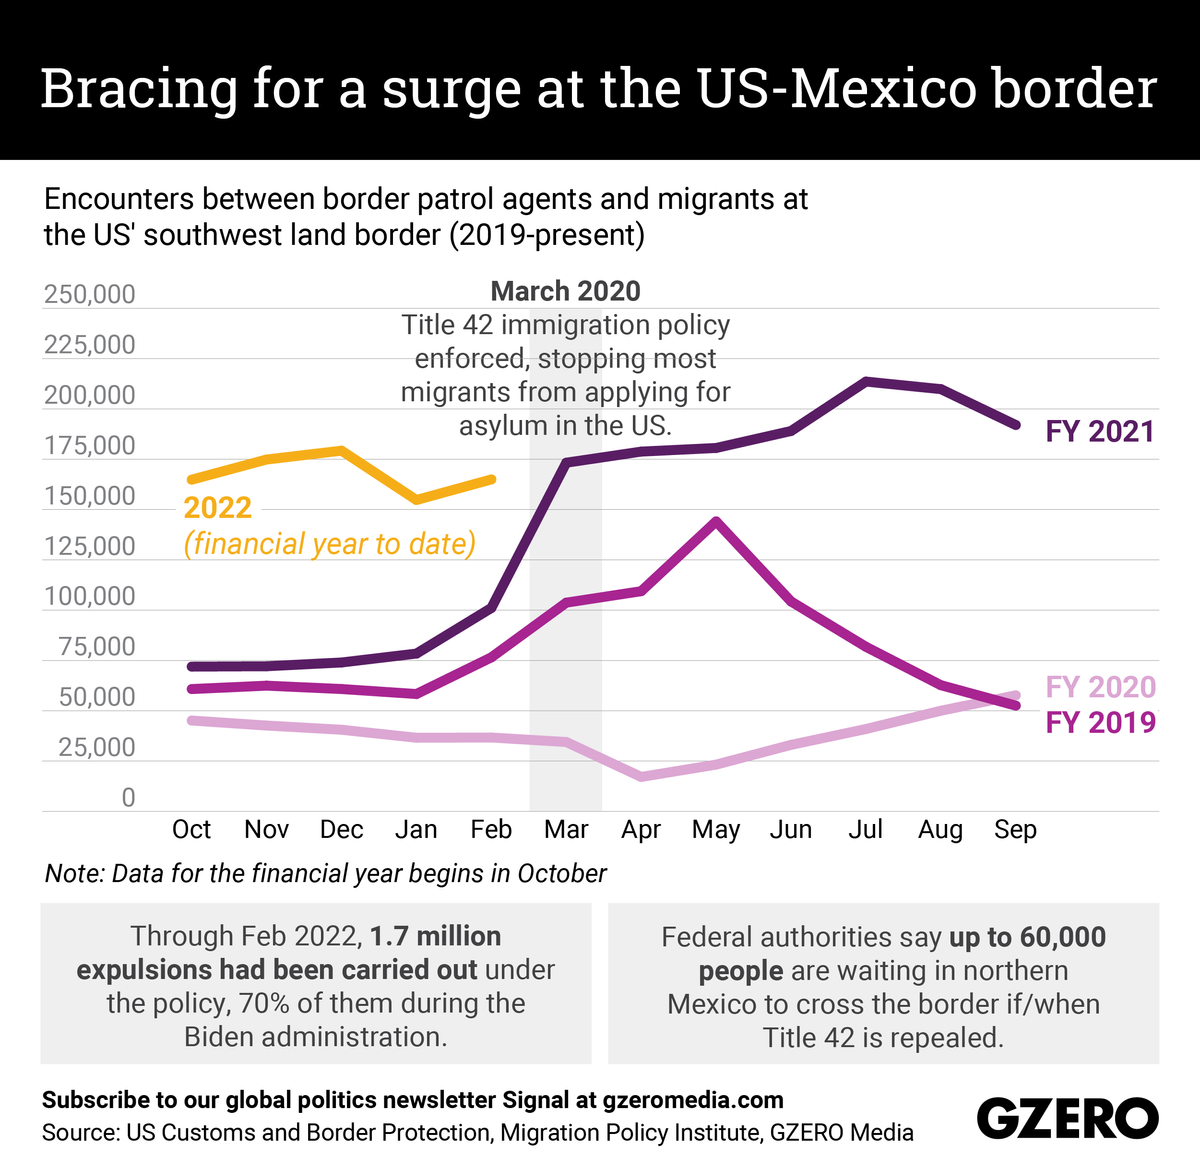 The Graphic Truth: Bracing for a surge at the US-Mexico border